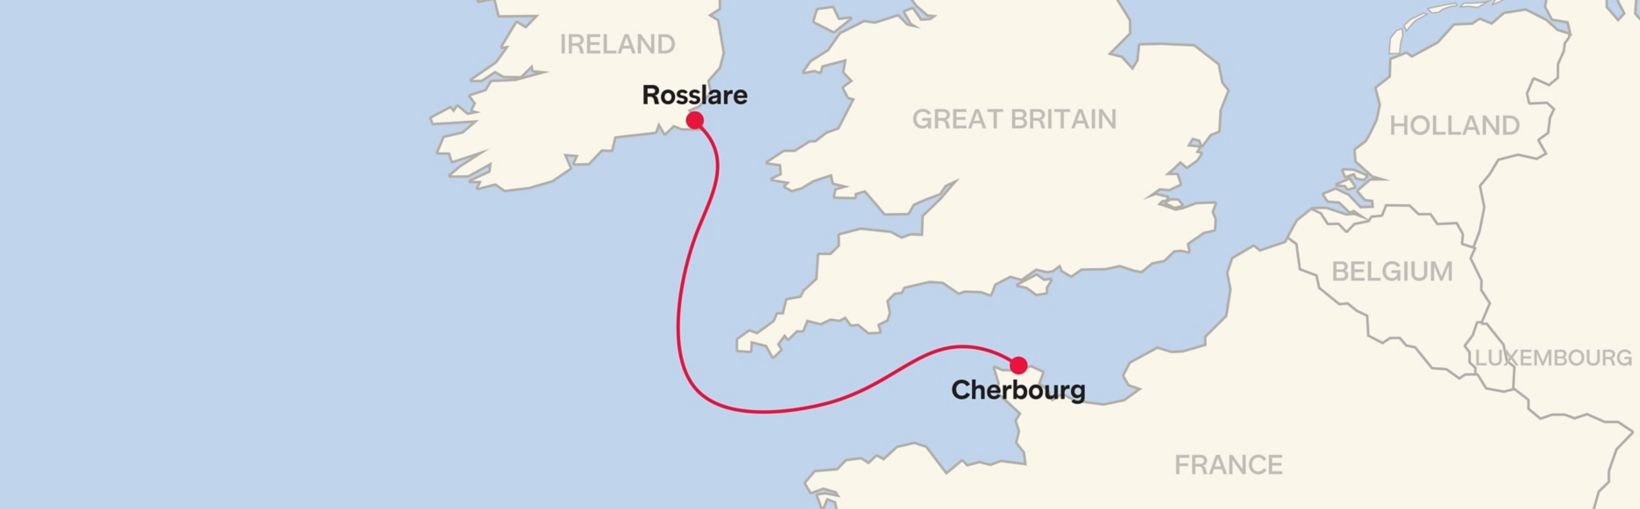 Routemap Rosslare - Cherbourg